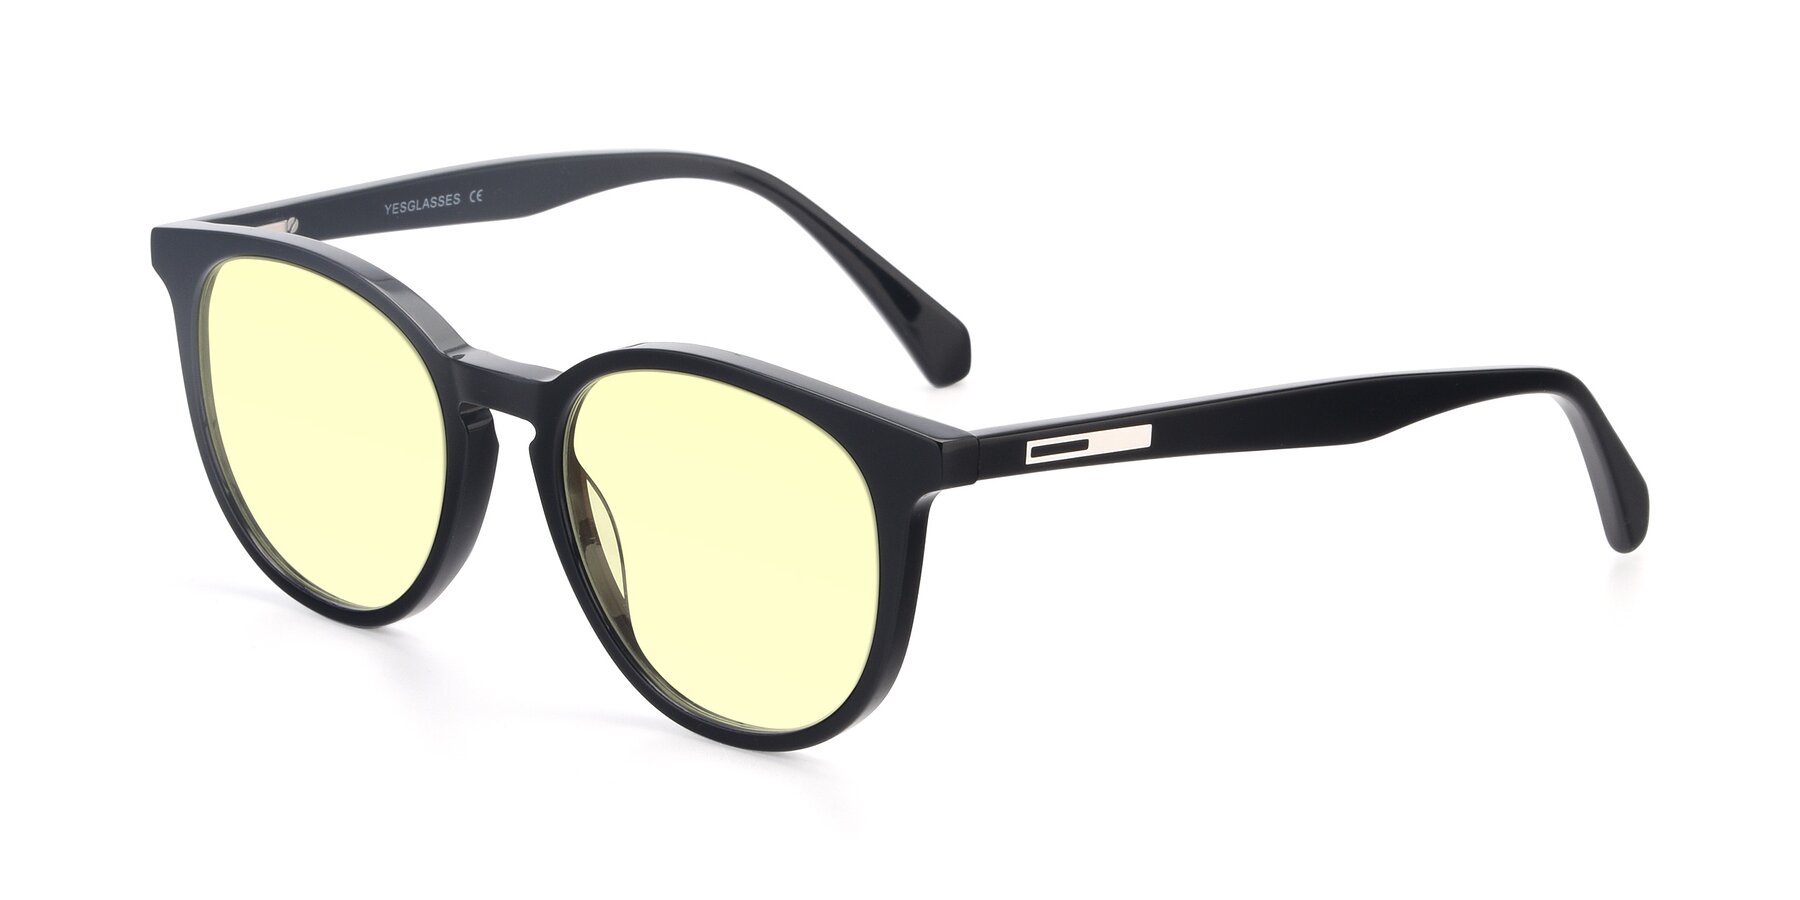 Angle of 17721 in Black with Light Yellow Tinted Lenses